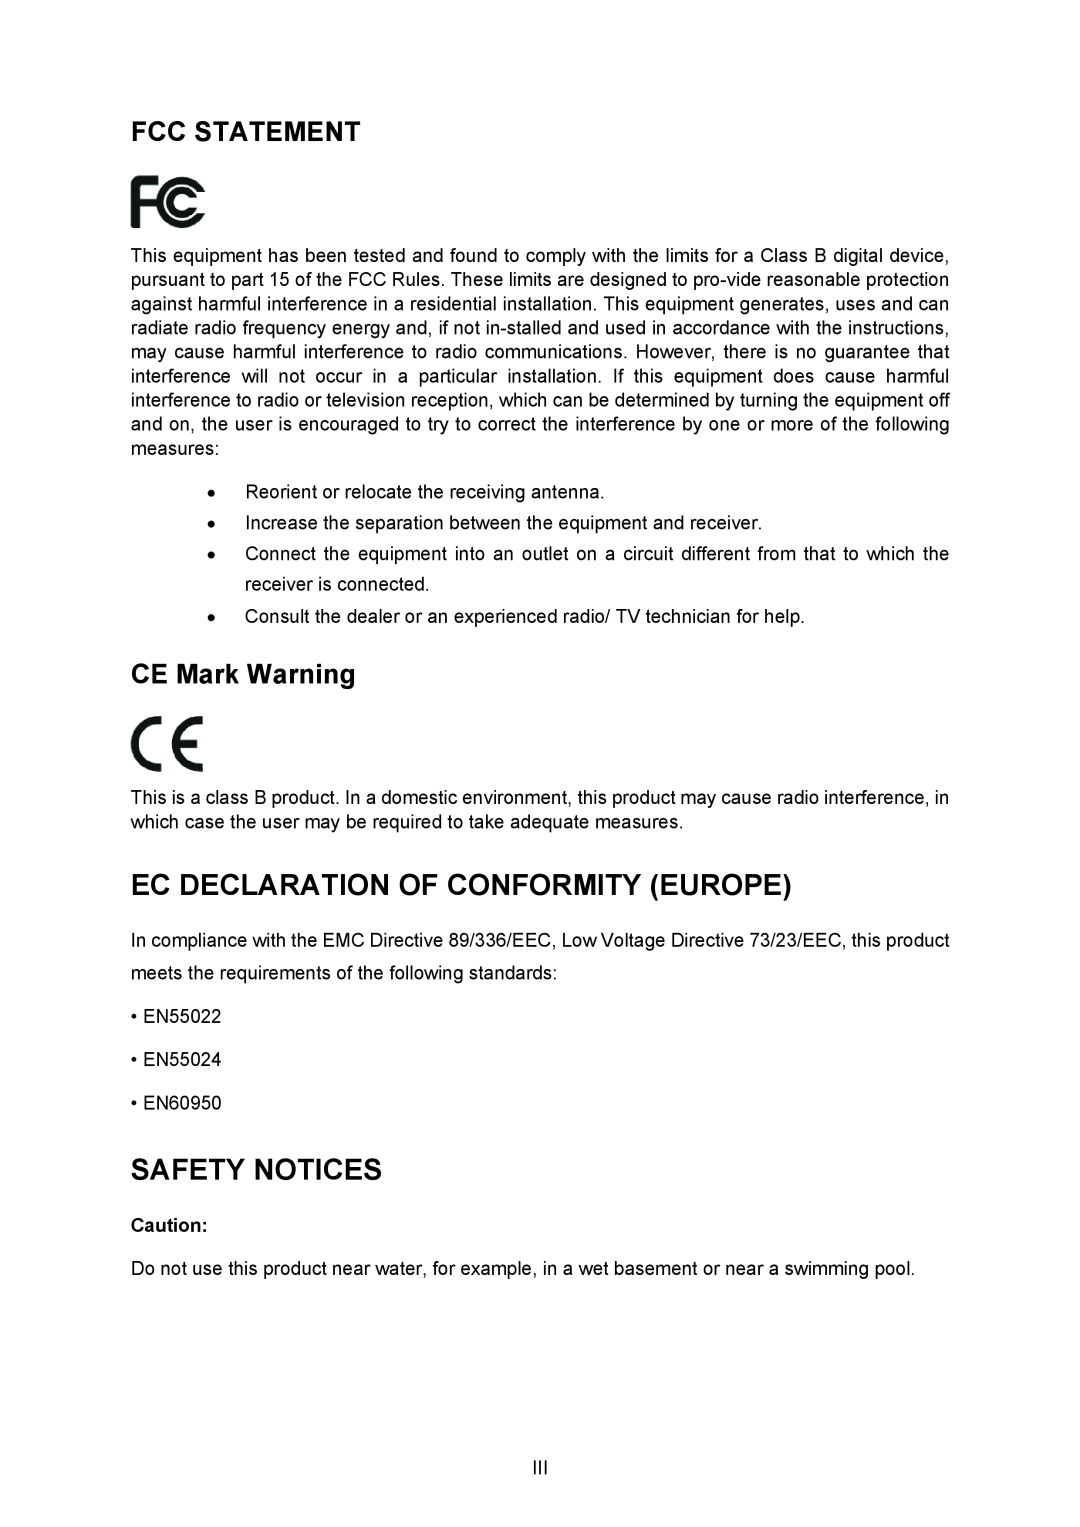 TP-Link TD-8840 manual Fcc Statement, CE Mark Warning, Ec Declaration Of Conformity Europe, Safety Notices 